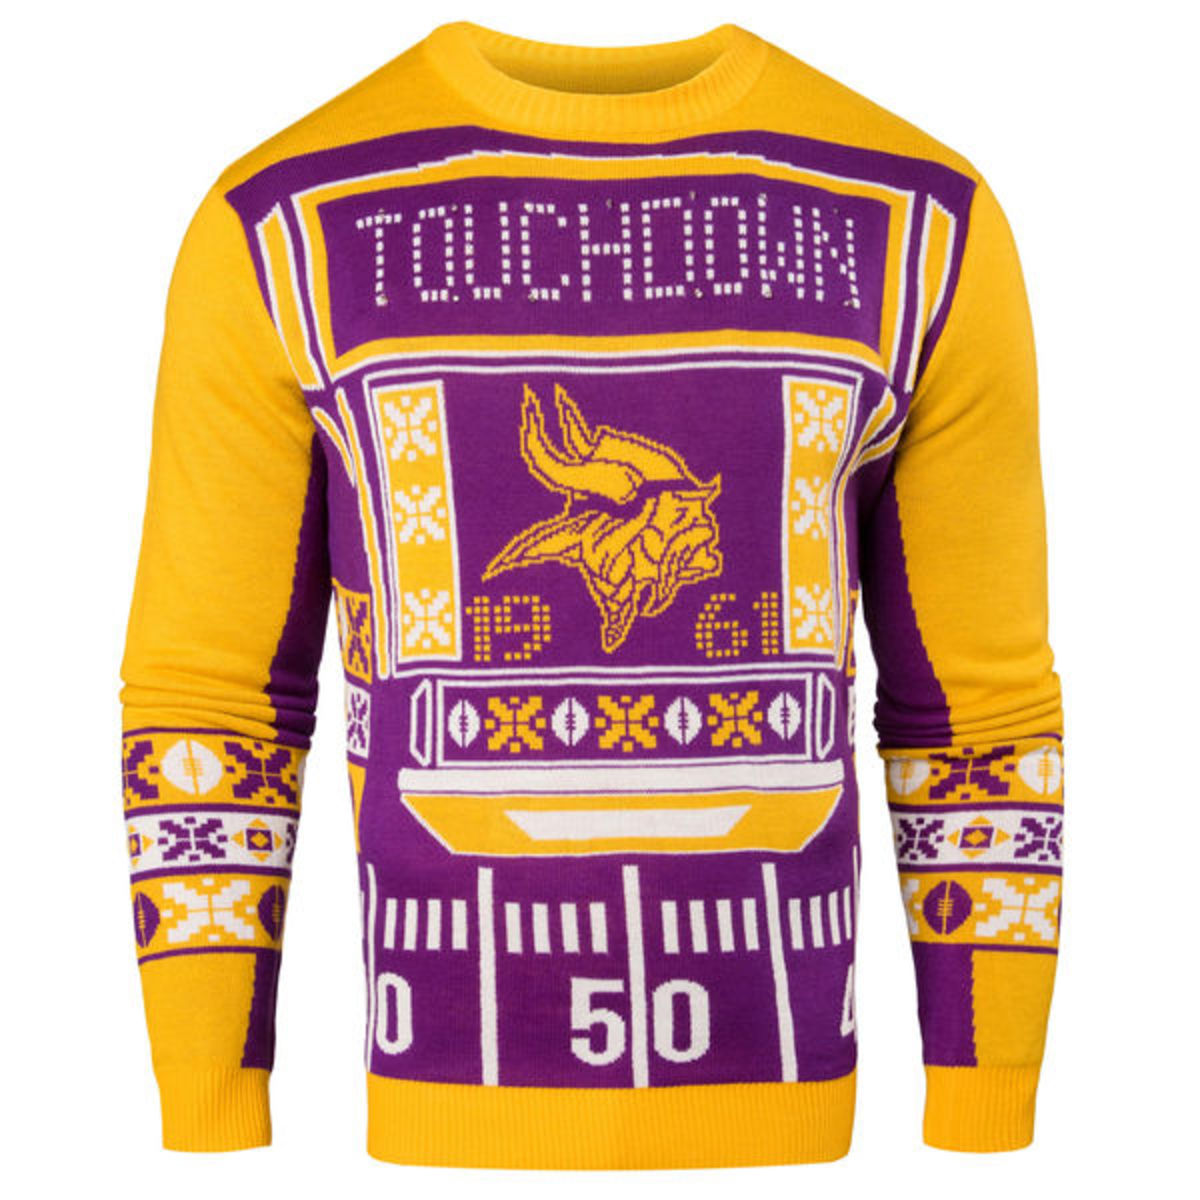 Ugly sports holiday sweaters in SI's store (Photos) - Sports